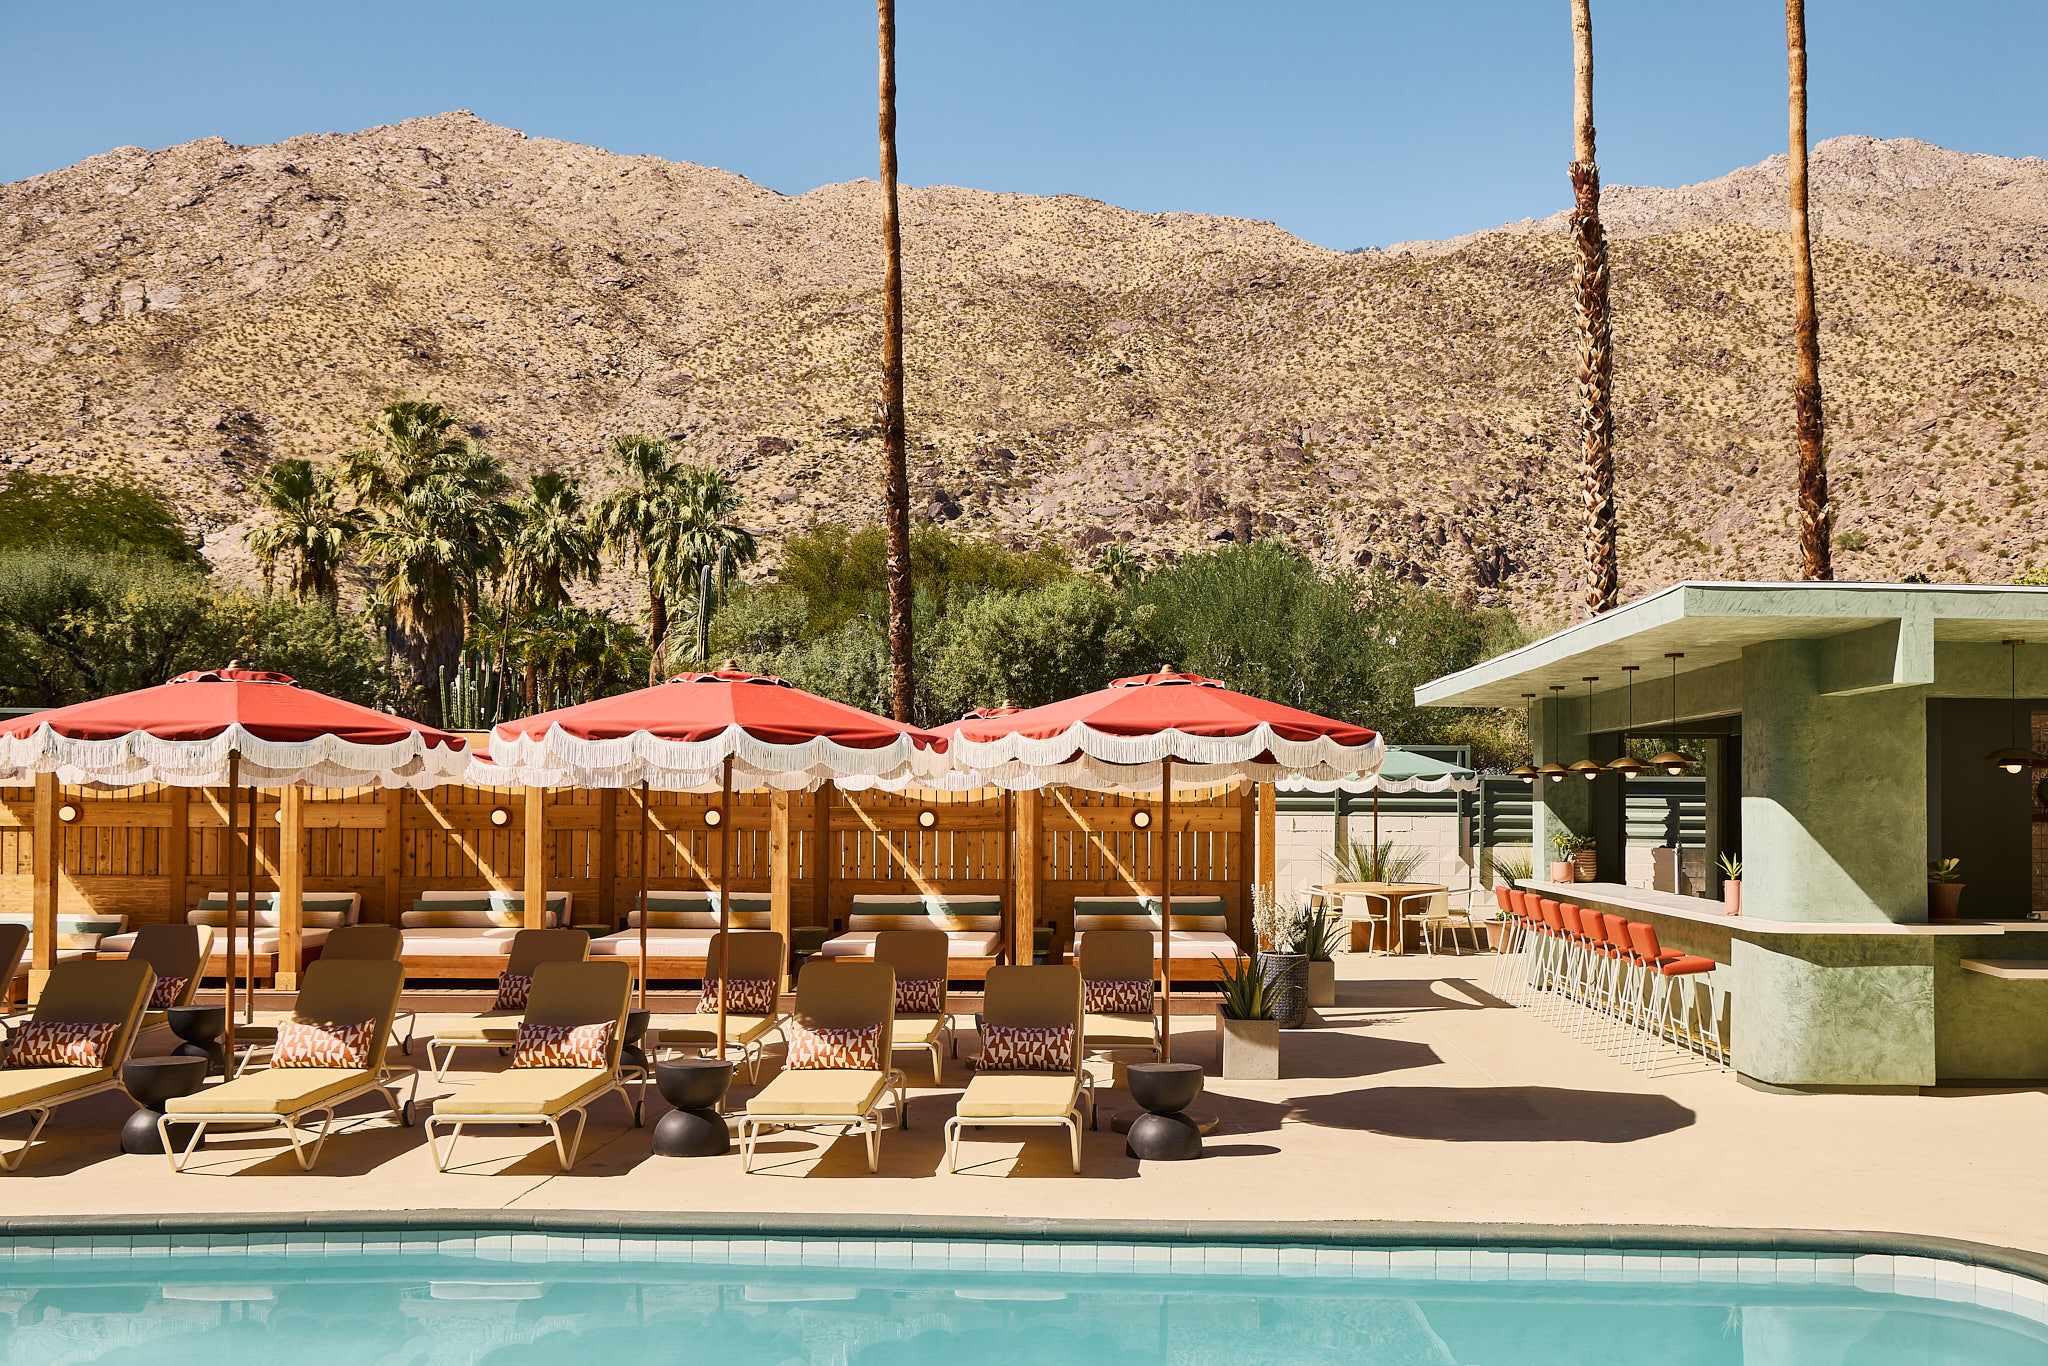 Life is sweet at Palm Springs’ latest boutique resort – lodges above par